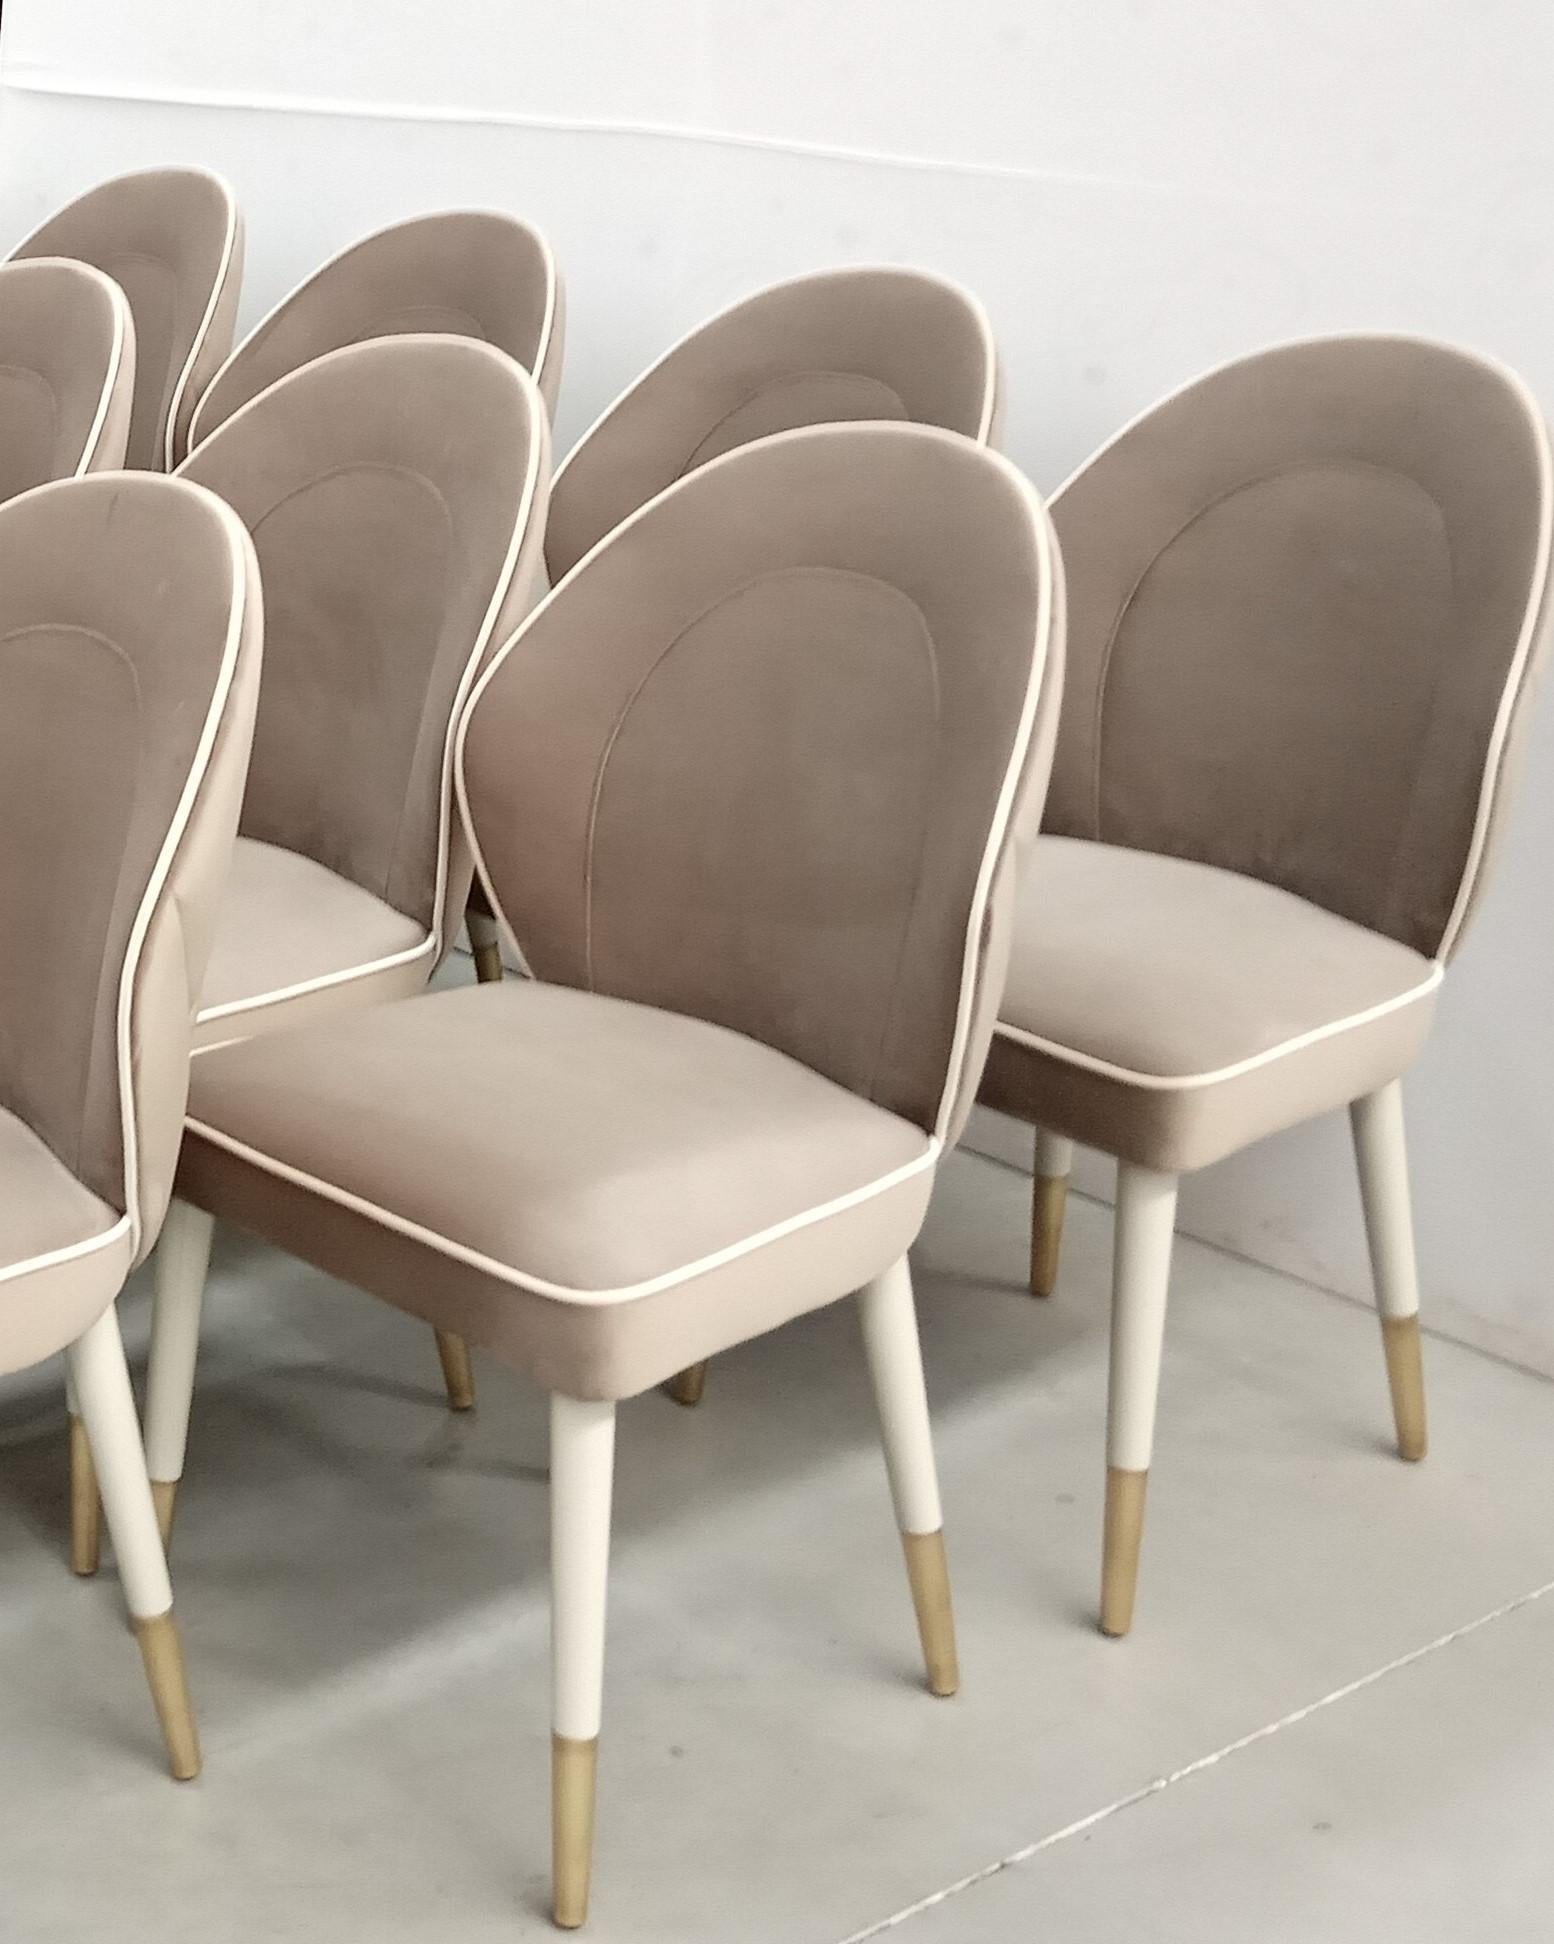 Portuguese Set of 6 Sophia Dining Chair with Beautiful Back Details and Brushed Brass Tips